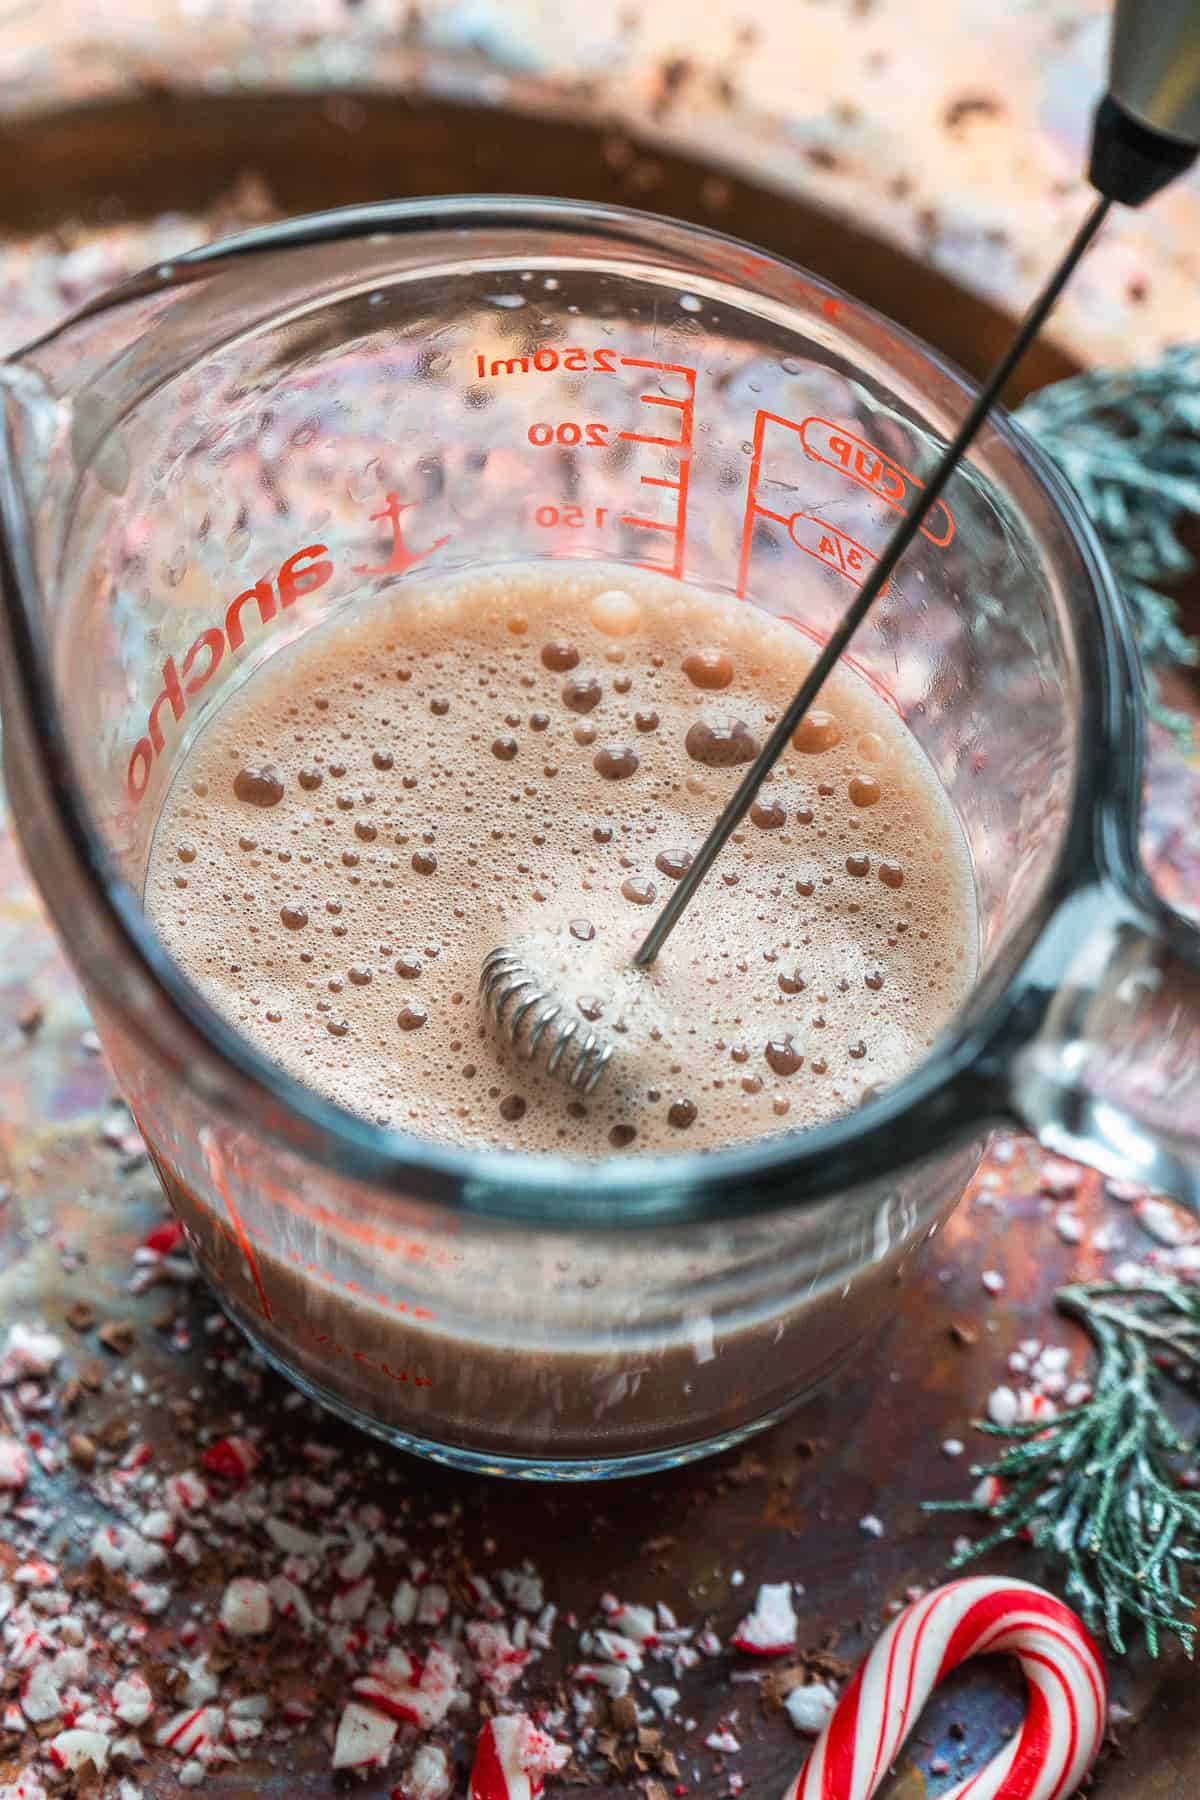 Chocolate creamer being frothed in a glass.